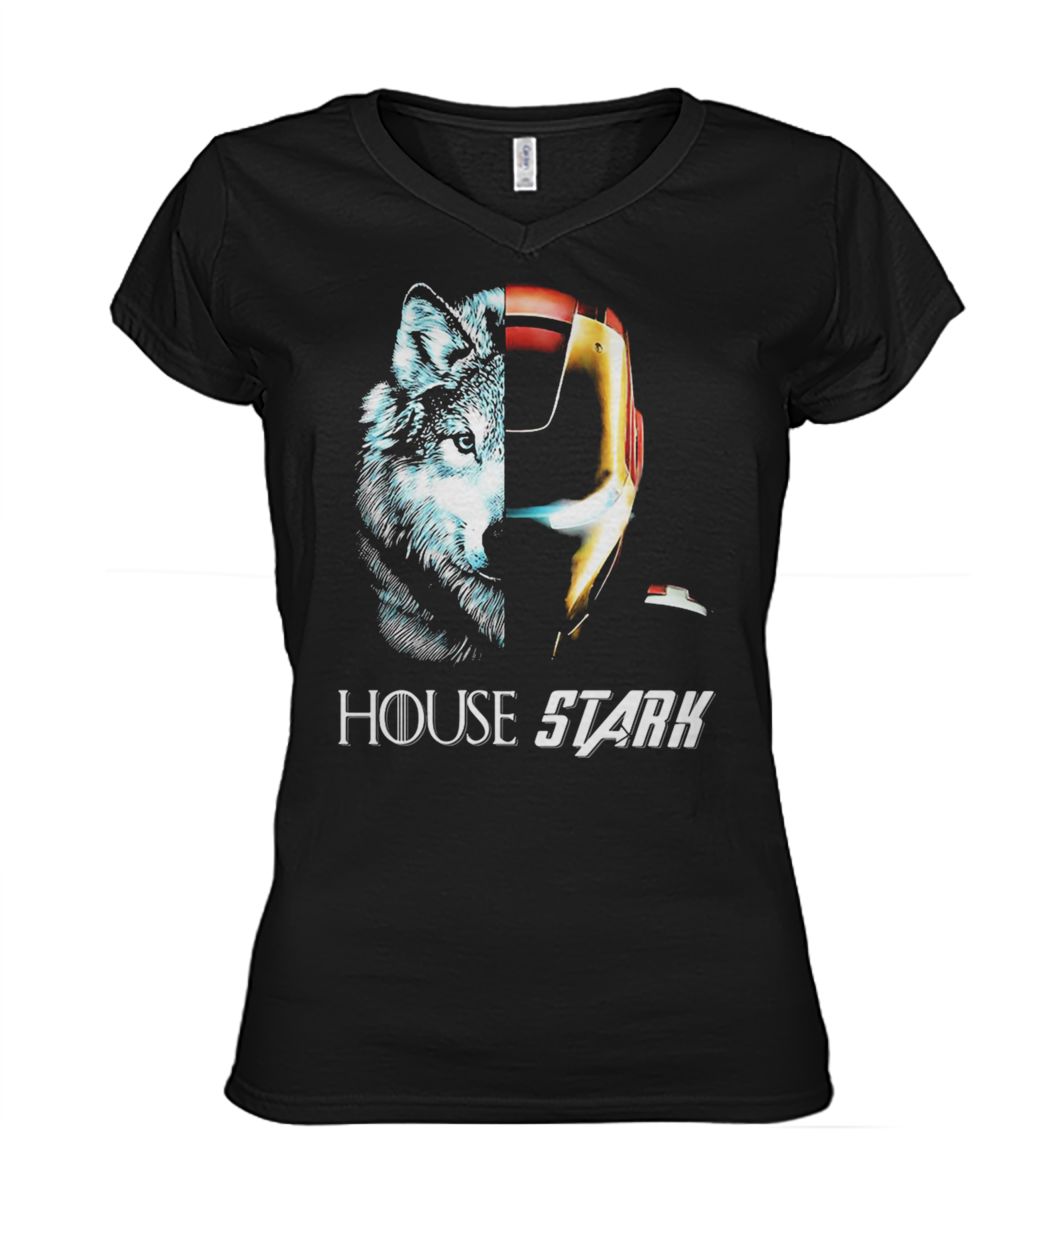 Game of thrones and avengers direwolf iron man mash up women's v-neck